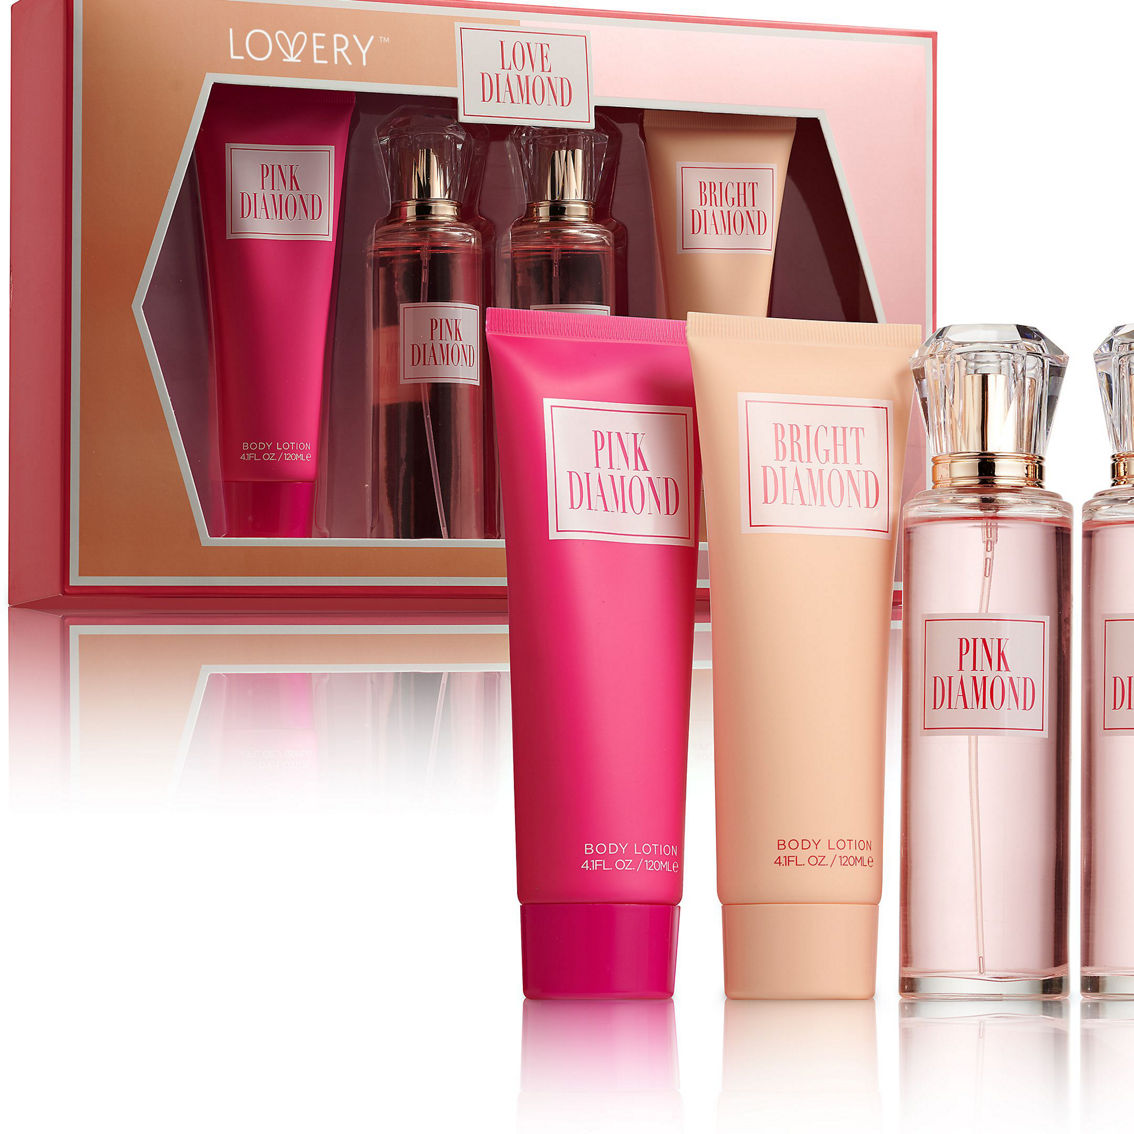 Lovery Pink Diamonds Deluxe 4 pc Home Spa Gift Set - Bath and Body Selfcare - Image 1 of 3